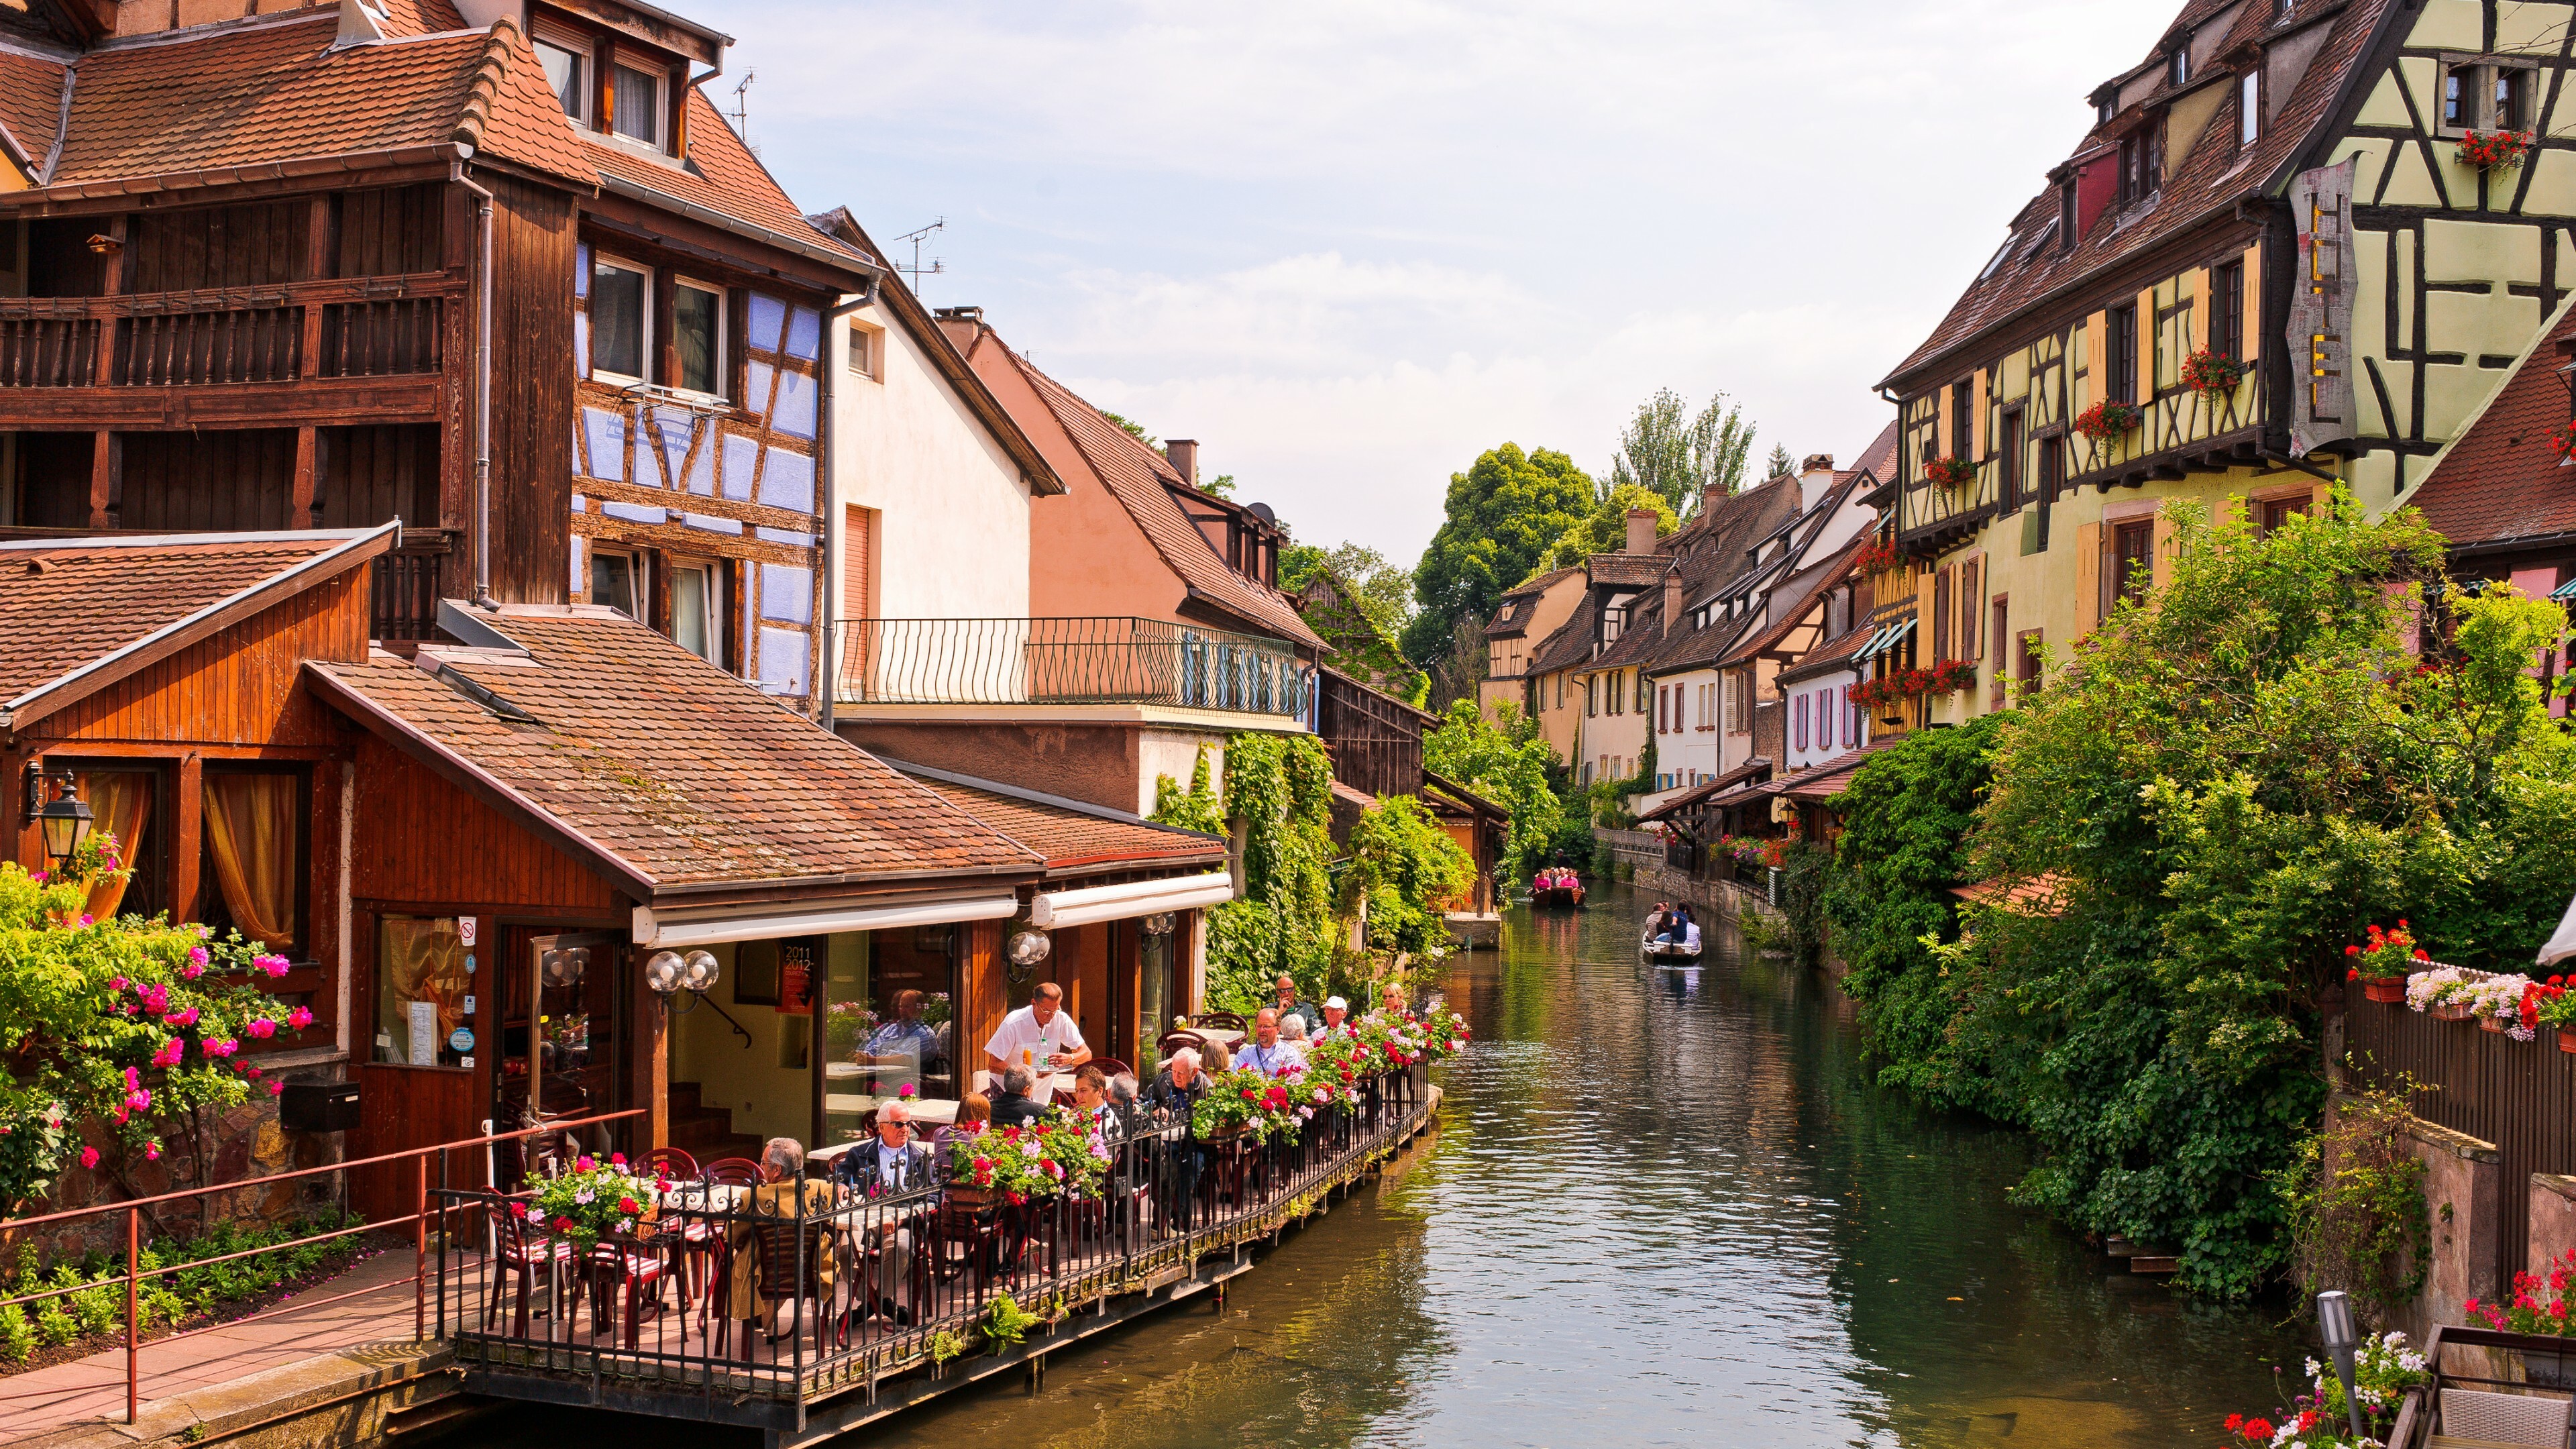 France: Colmar, Tourism, Travel, Architecture, The French Republic. 3840x2160 4K Background.